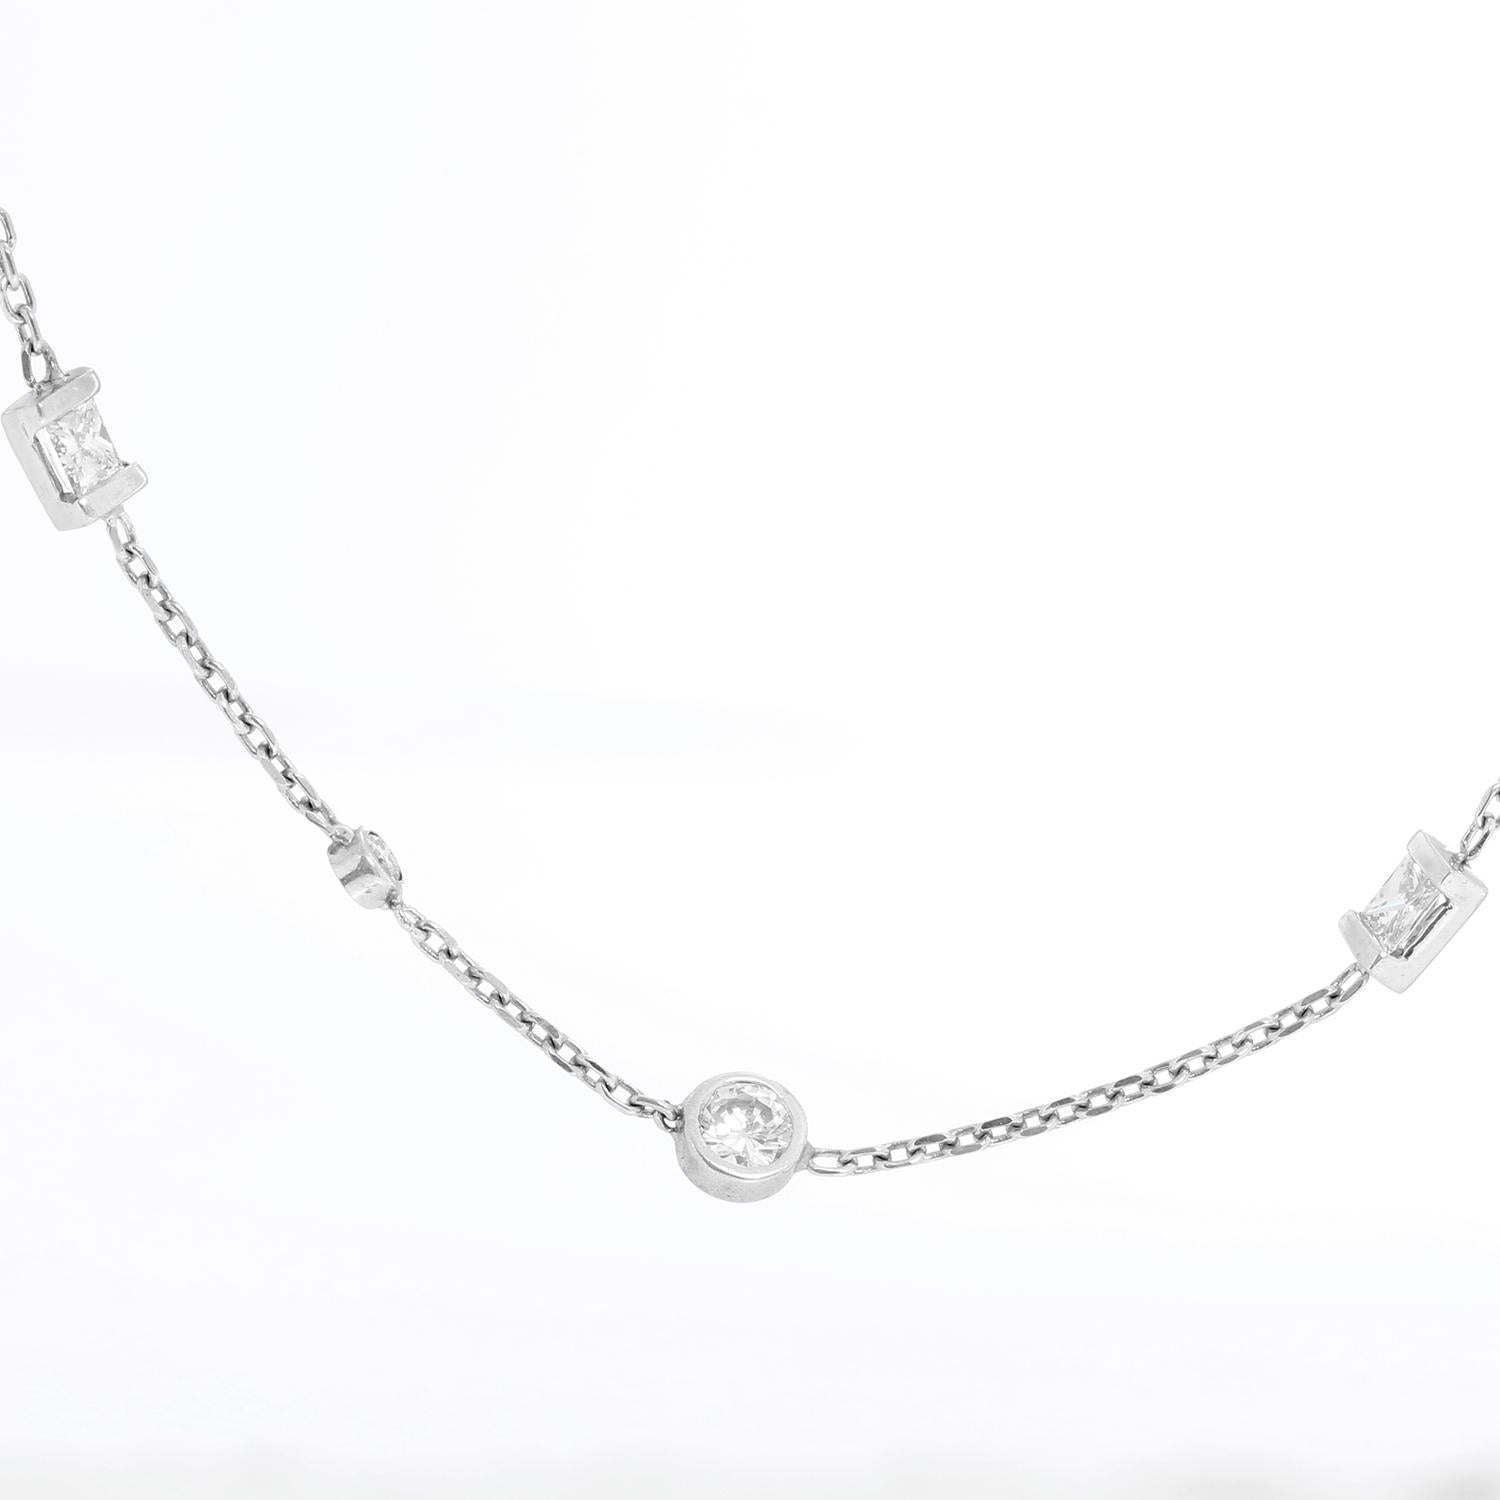 14K White Gold Diamond by the Yard Necklace - Round brilliant diamonds and Square brilliant diamonds. Weighing 2.9 carats. Colo Grade Near Colorless, Clarity SI. 
chain length 17 inches.